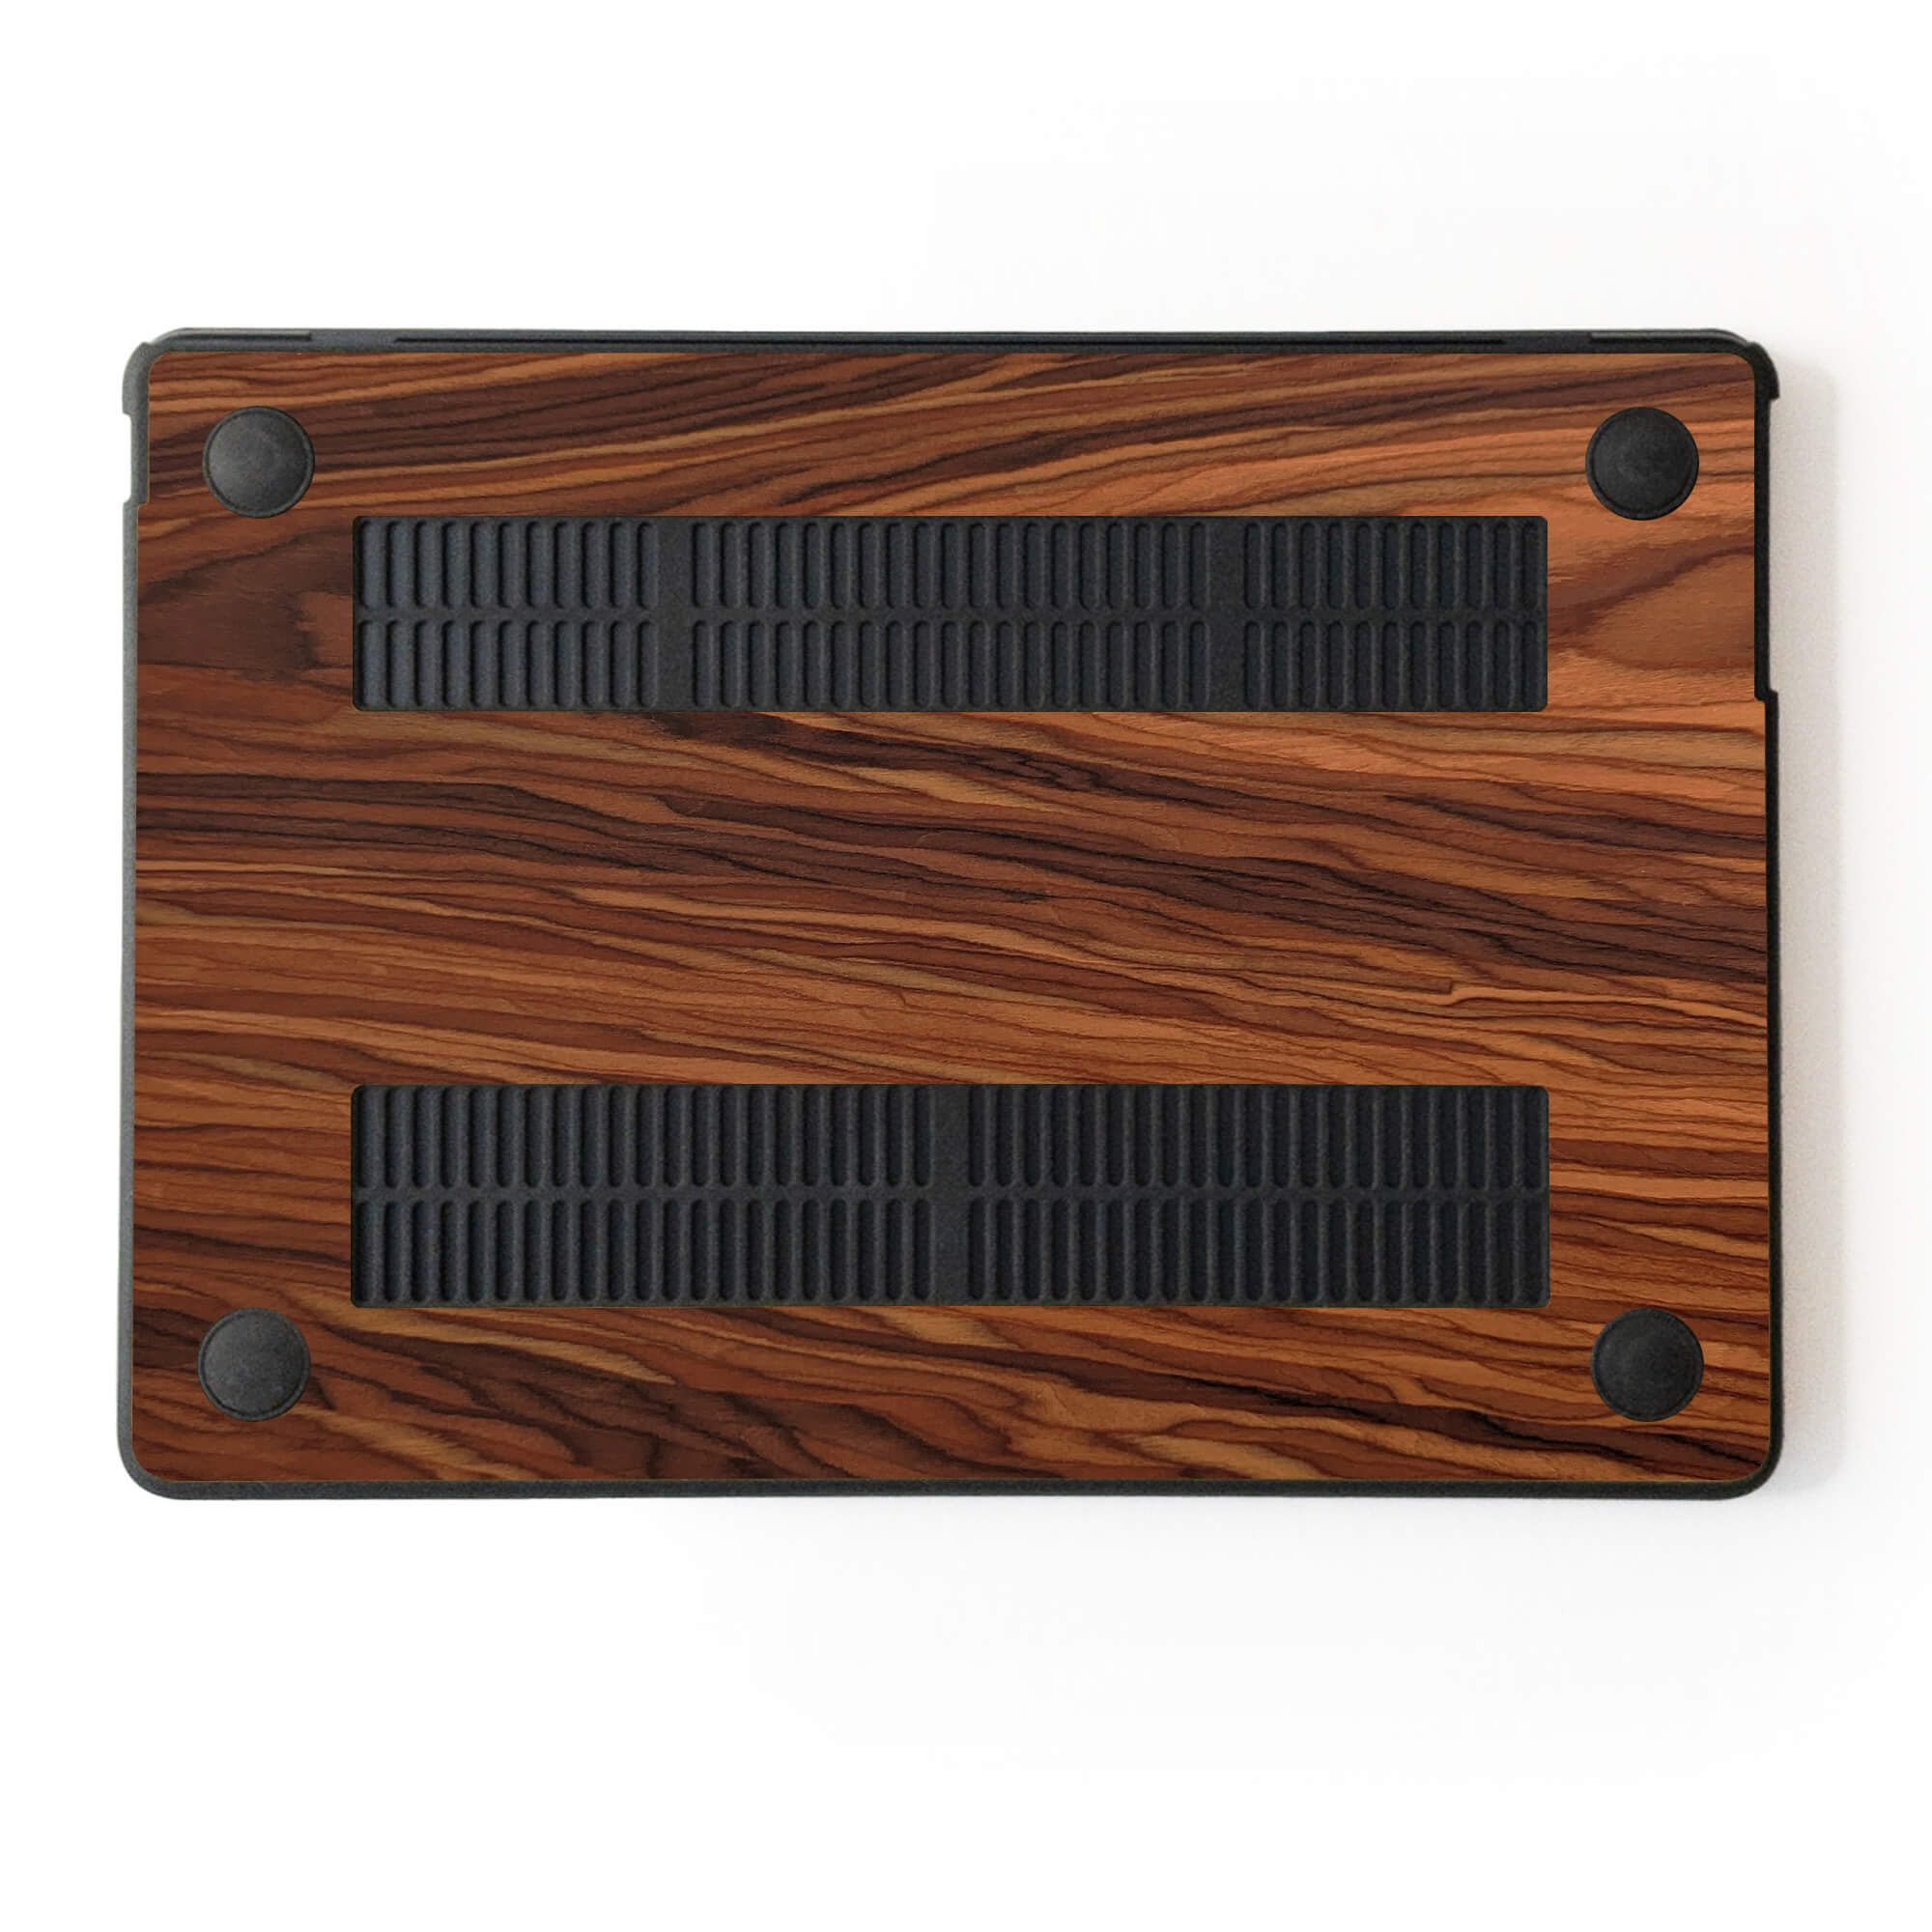 MacBook Wood Cases & Skins. Designed to make you stand out – Glitty